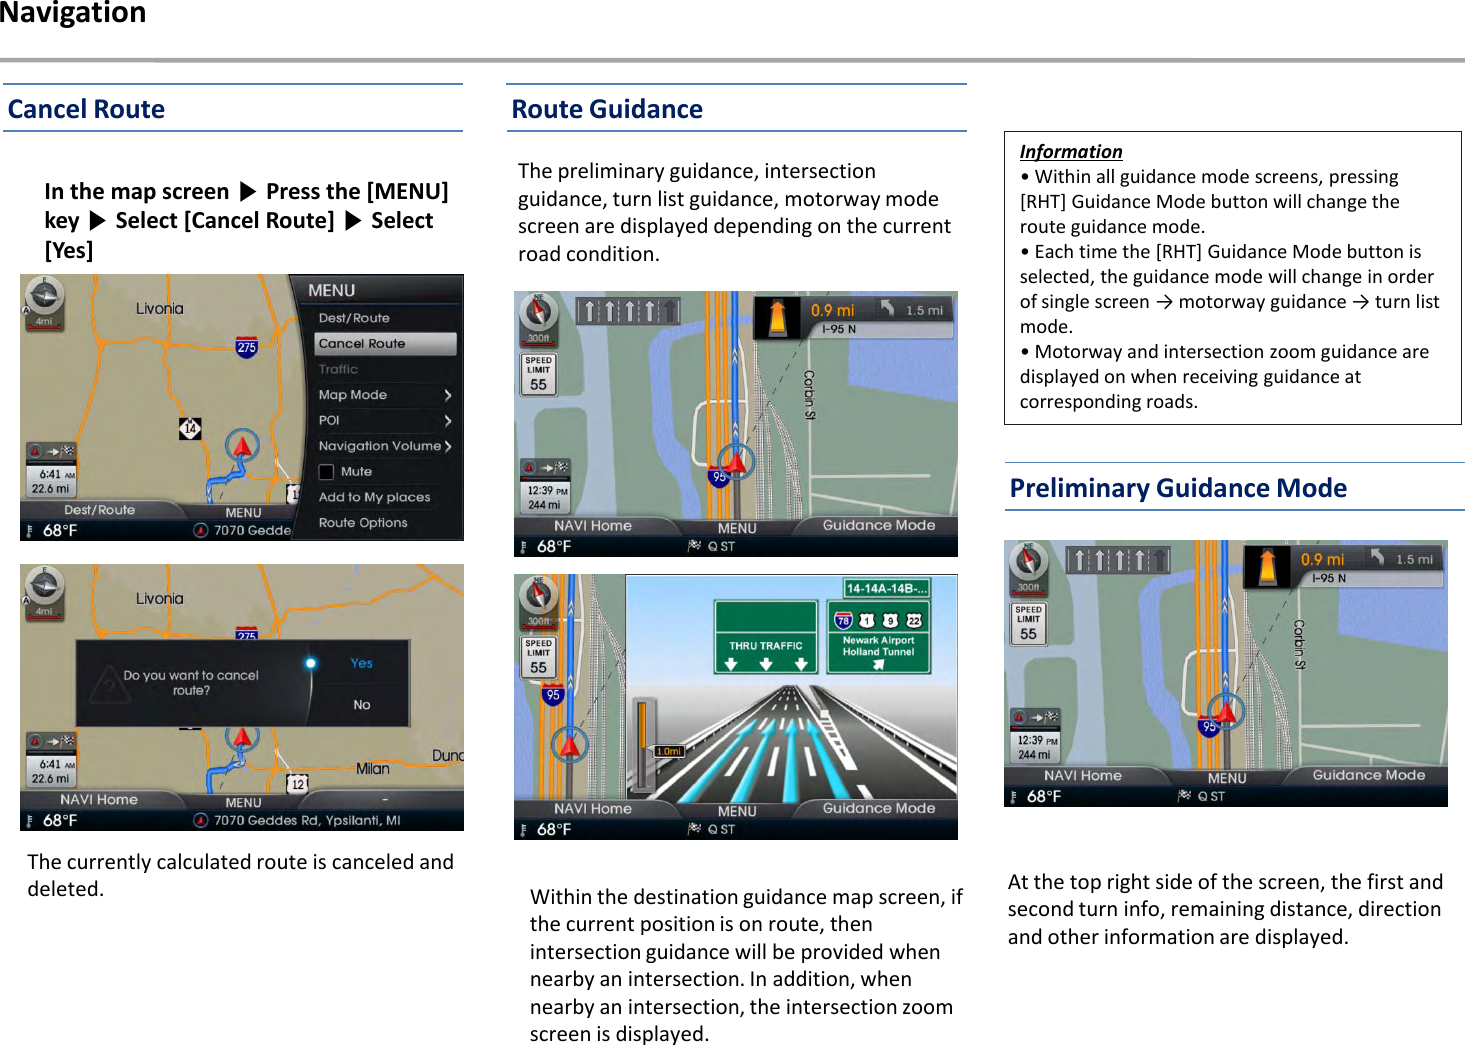 The currently calculated route is canceled and deleted.NavigationIn the map screen ▶Press the [MENU] key ▶Select [Cancel Route] ▶Select [Yes]Within the destination guidance map screen, if the current position is on route, then intersection guidance will be provided when nearby an intersection. In addition, when nearby an intersection, the intersection zoom screen is displayed.The preliminary guidance, intersection guidance, turn list guidance, motorway mode screen are displayed depending on the current road condition.Information• Within all guidance mode screens, pressing [RHT] Guidance Mode button will change the route guidance mode.• Each time the [RHT] Guidance Mode button is selected, the guidance mode will change in order of single screen → motorway guidance → turn list mode.• Motorway and intersection zoom guidance are displayed on when receiving guidance at corresponding roads.At the top right side of the screen, the first and second turn info, remaining distance, direction and other information are displayed.Cancel Route Route GuidancePreliminary Guidance Mode